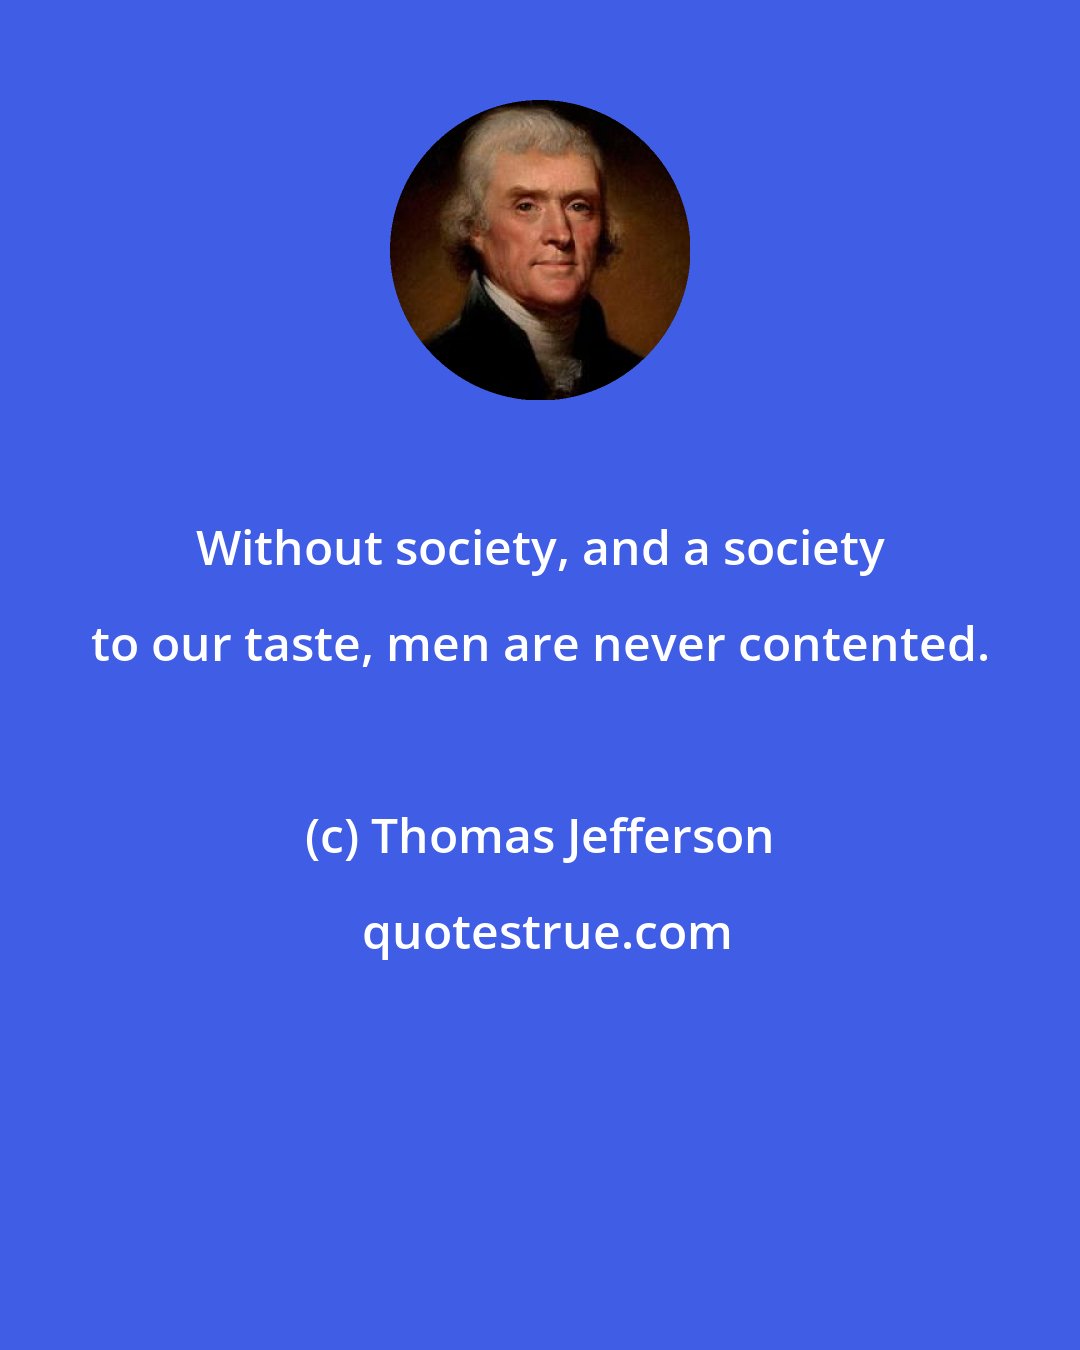 Thomas Jefferson: Without society, and a society to our taste, men are never contented.